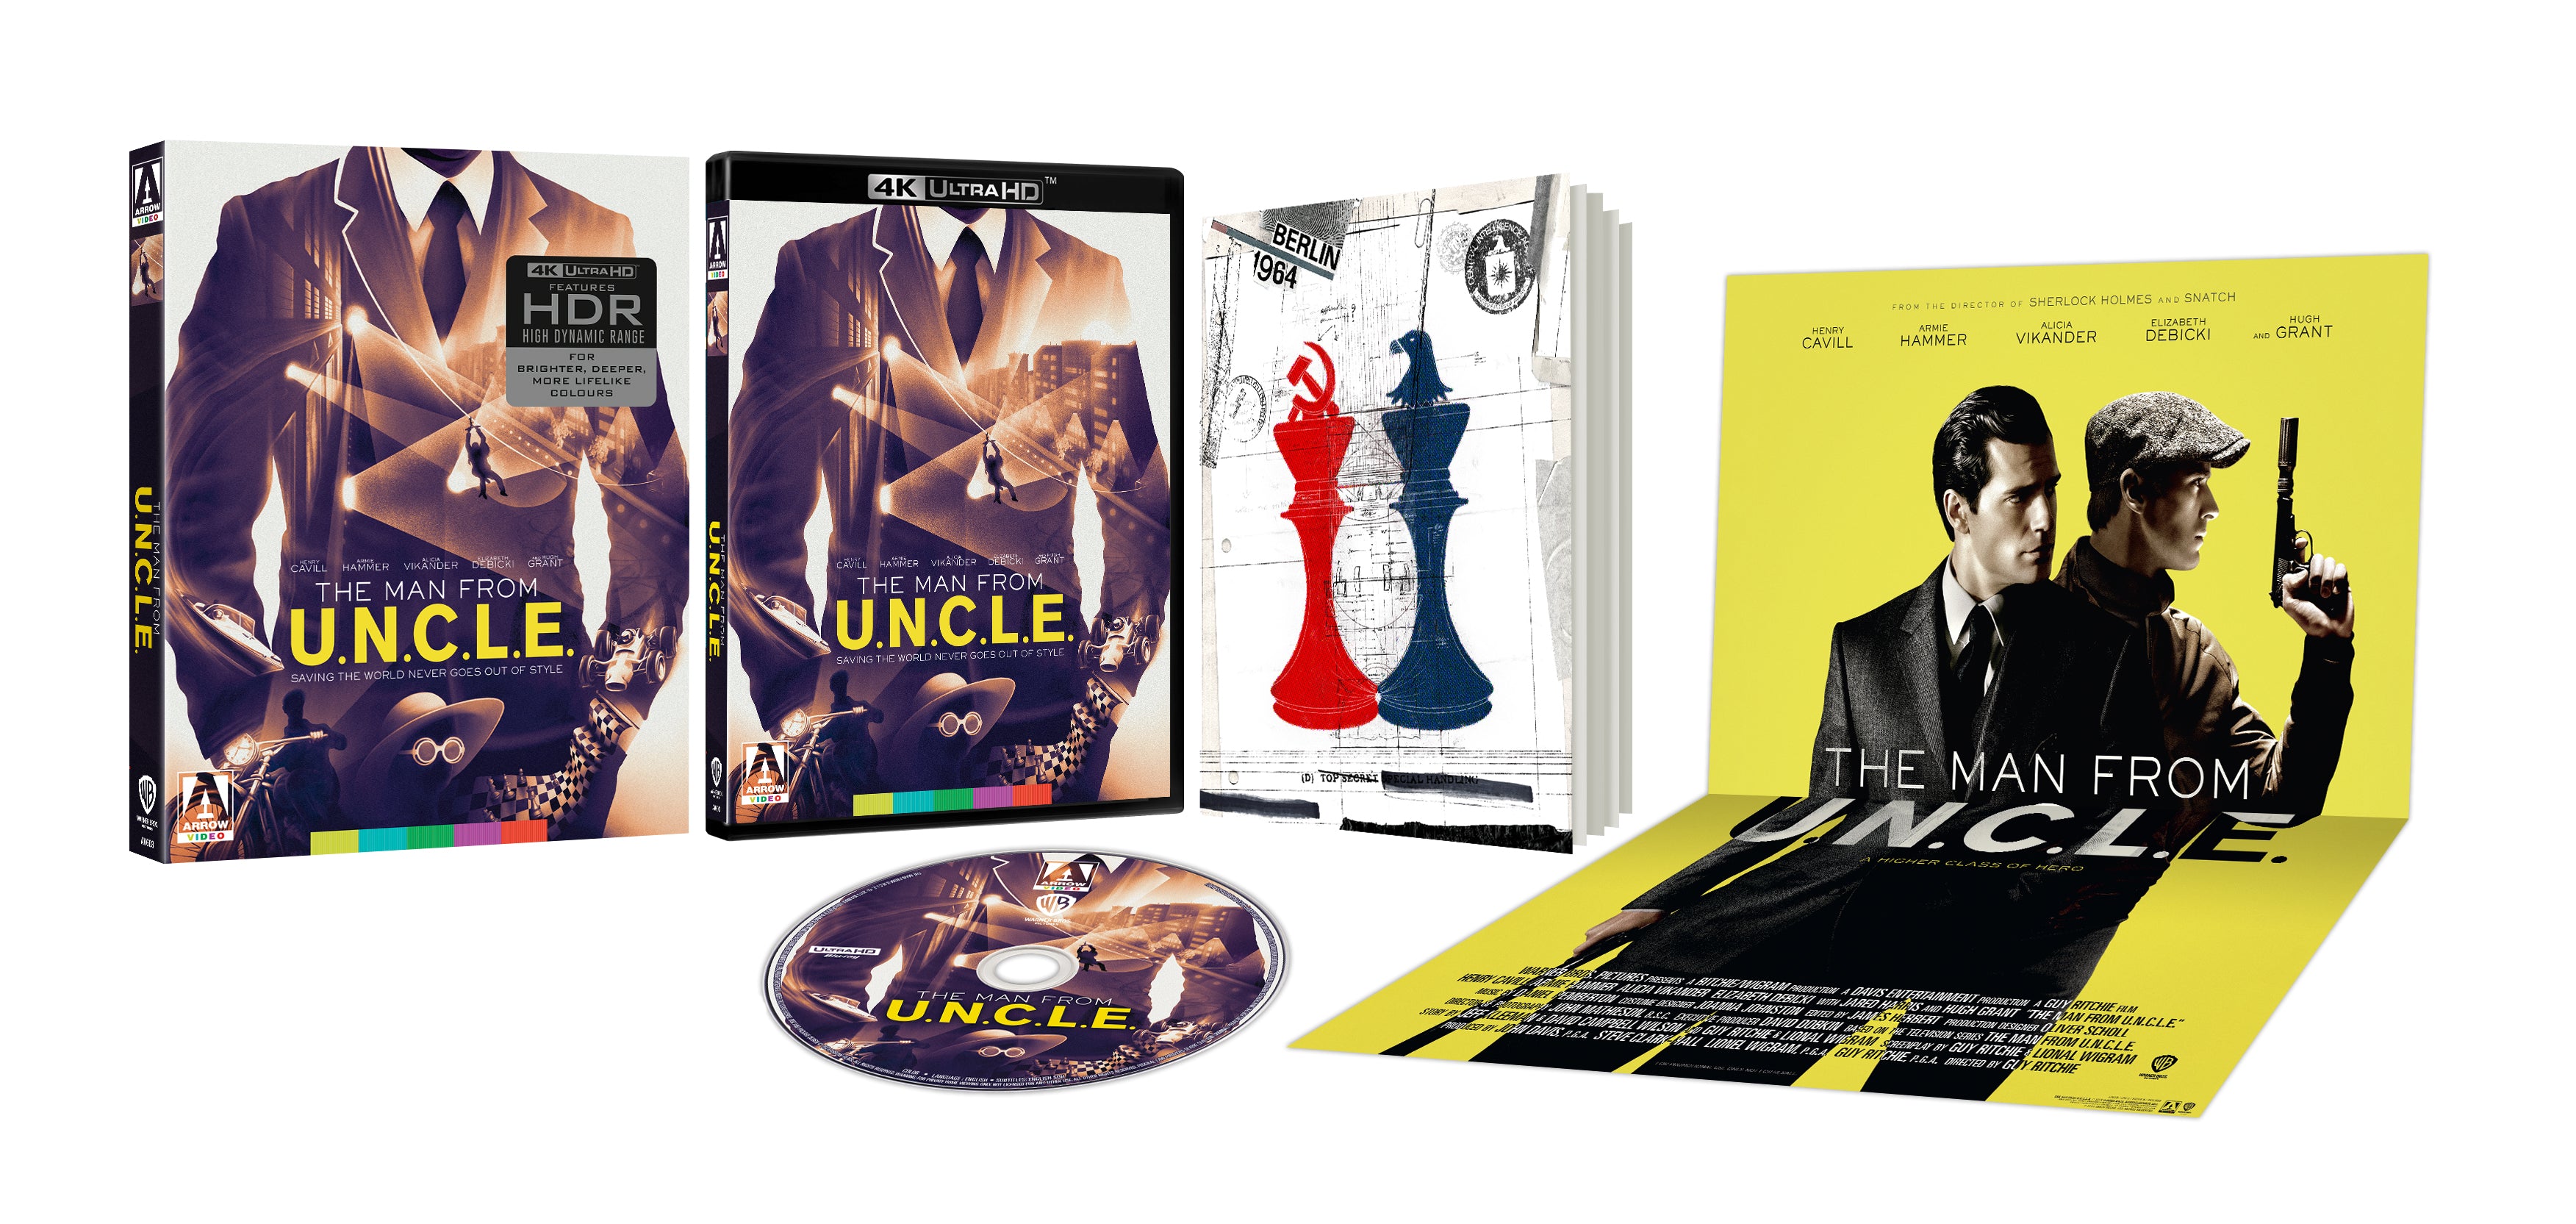 THE MAN FROM U.N.C.L.E. (LIMITED EDITION) 4K UHD [PRE-ORDER]